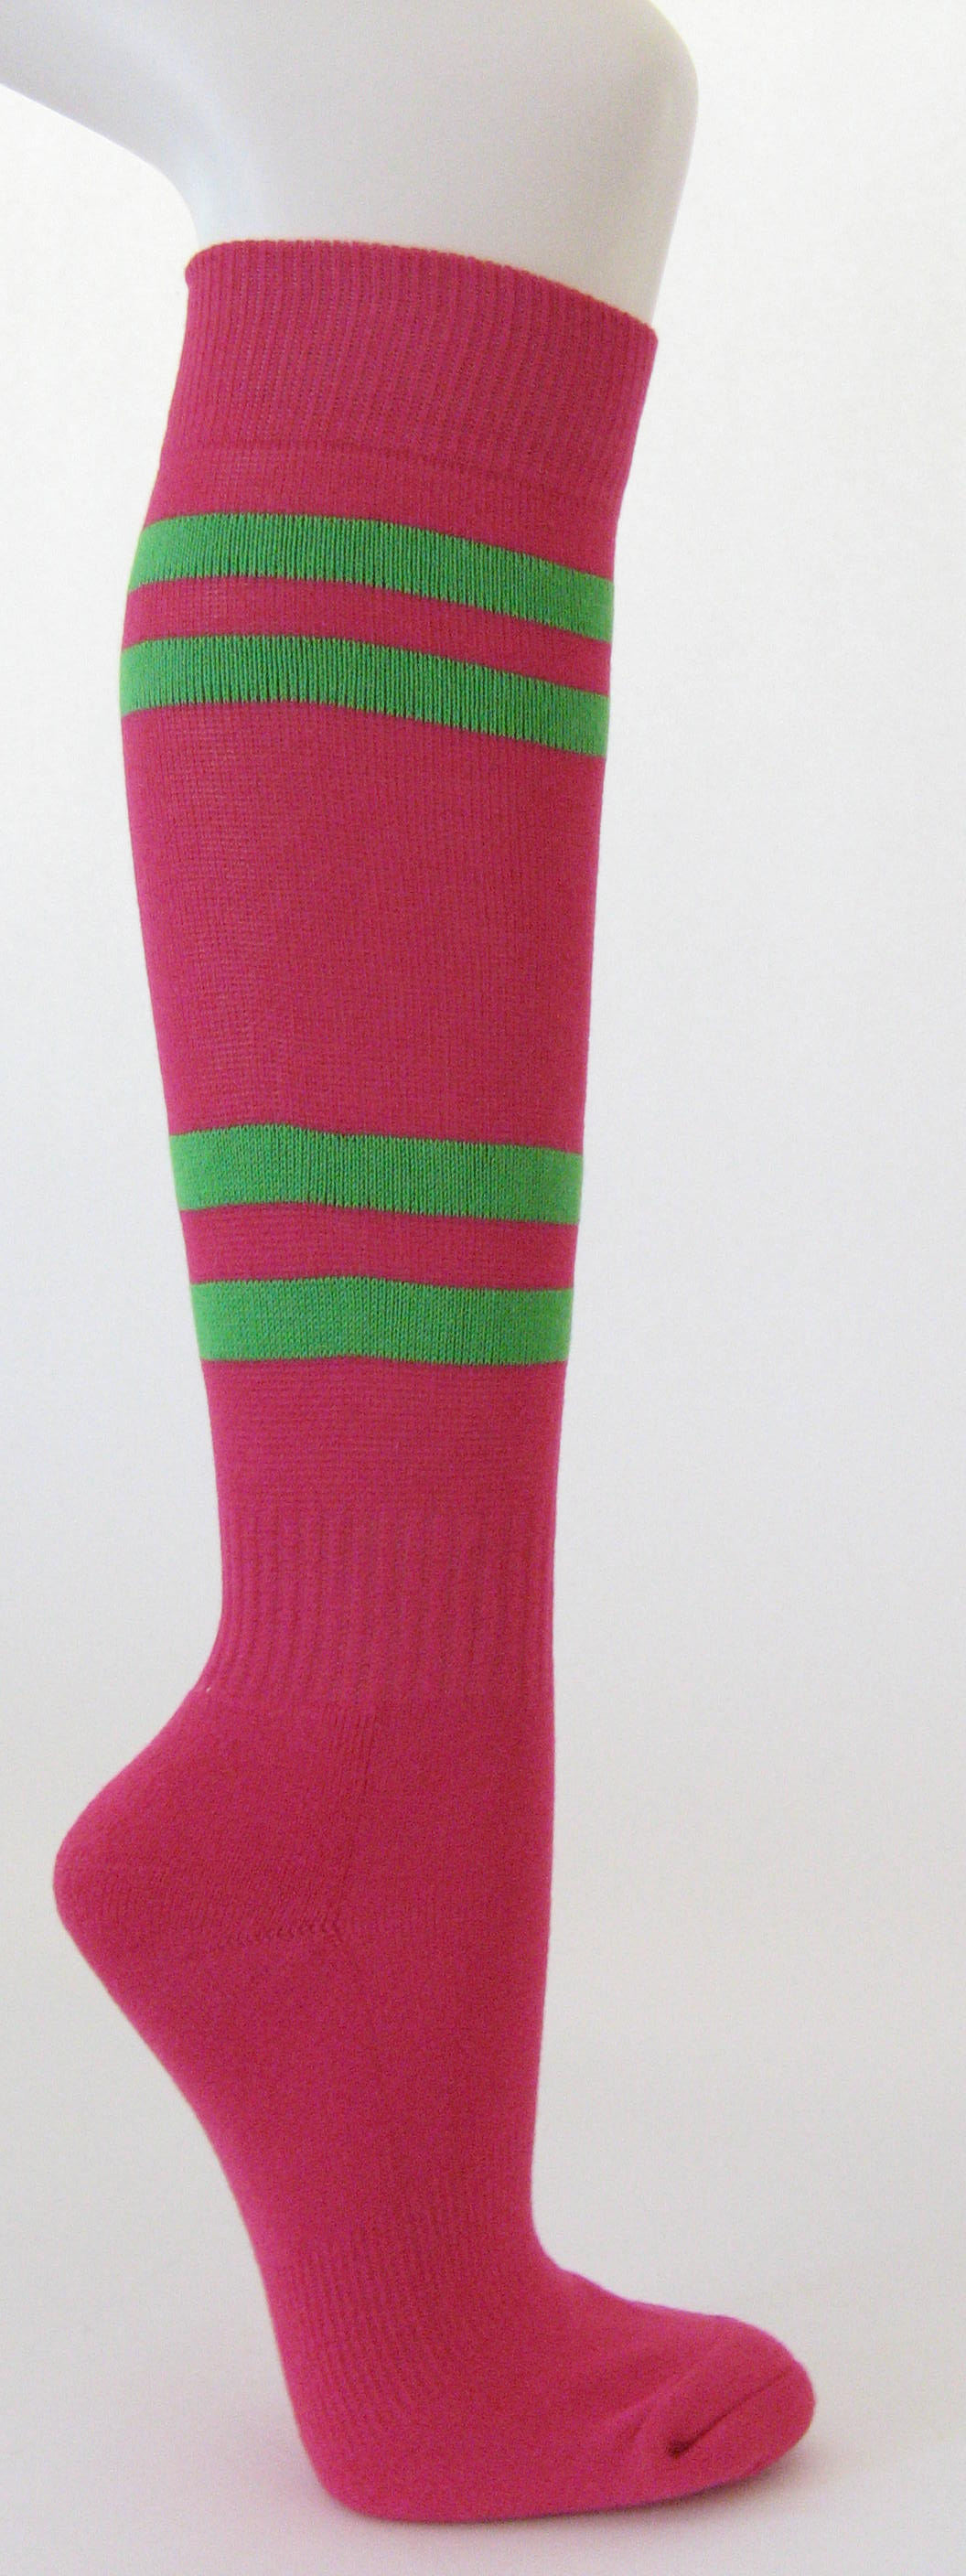 Hot pink cotton knee socks with bright green stripes